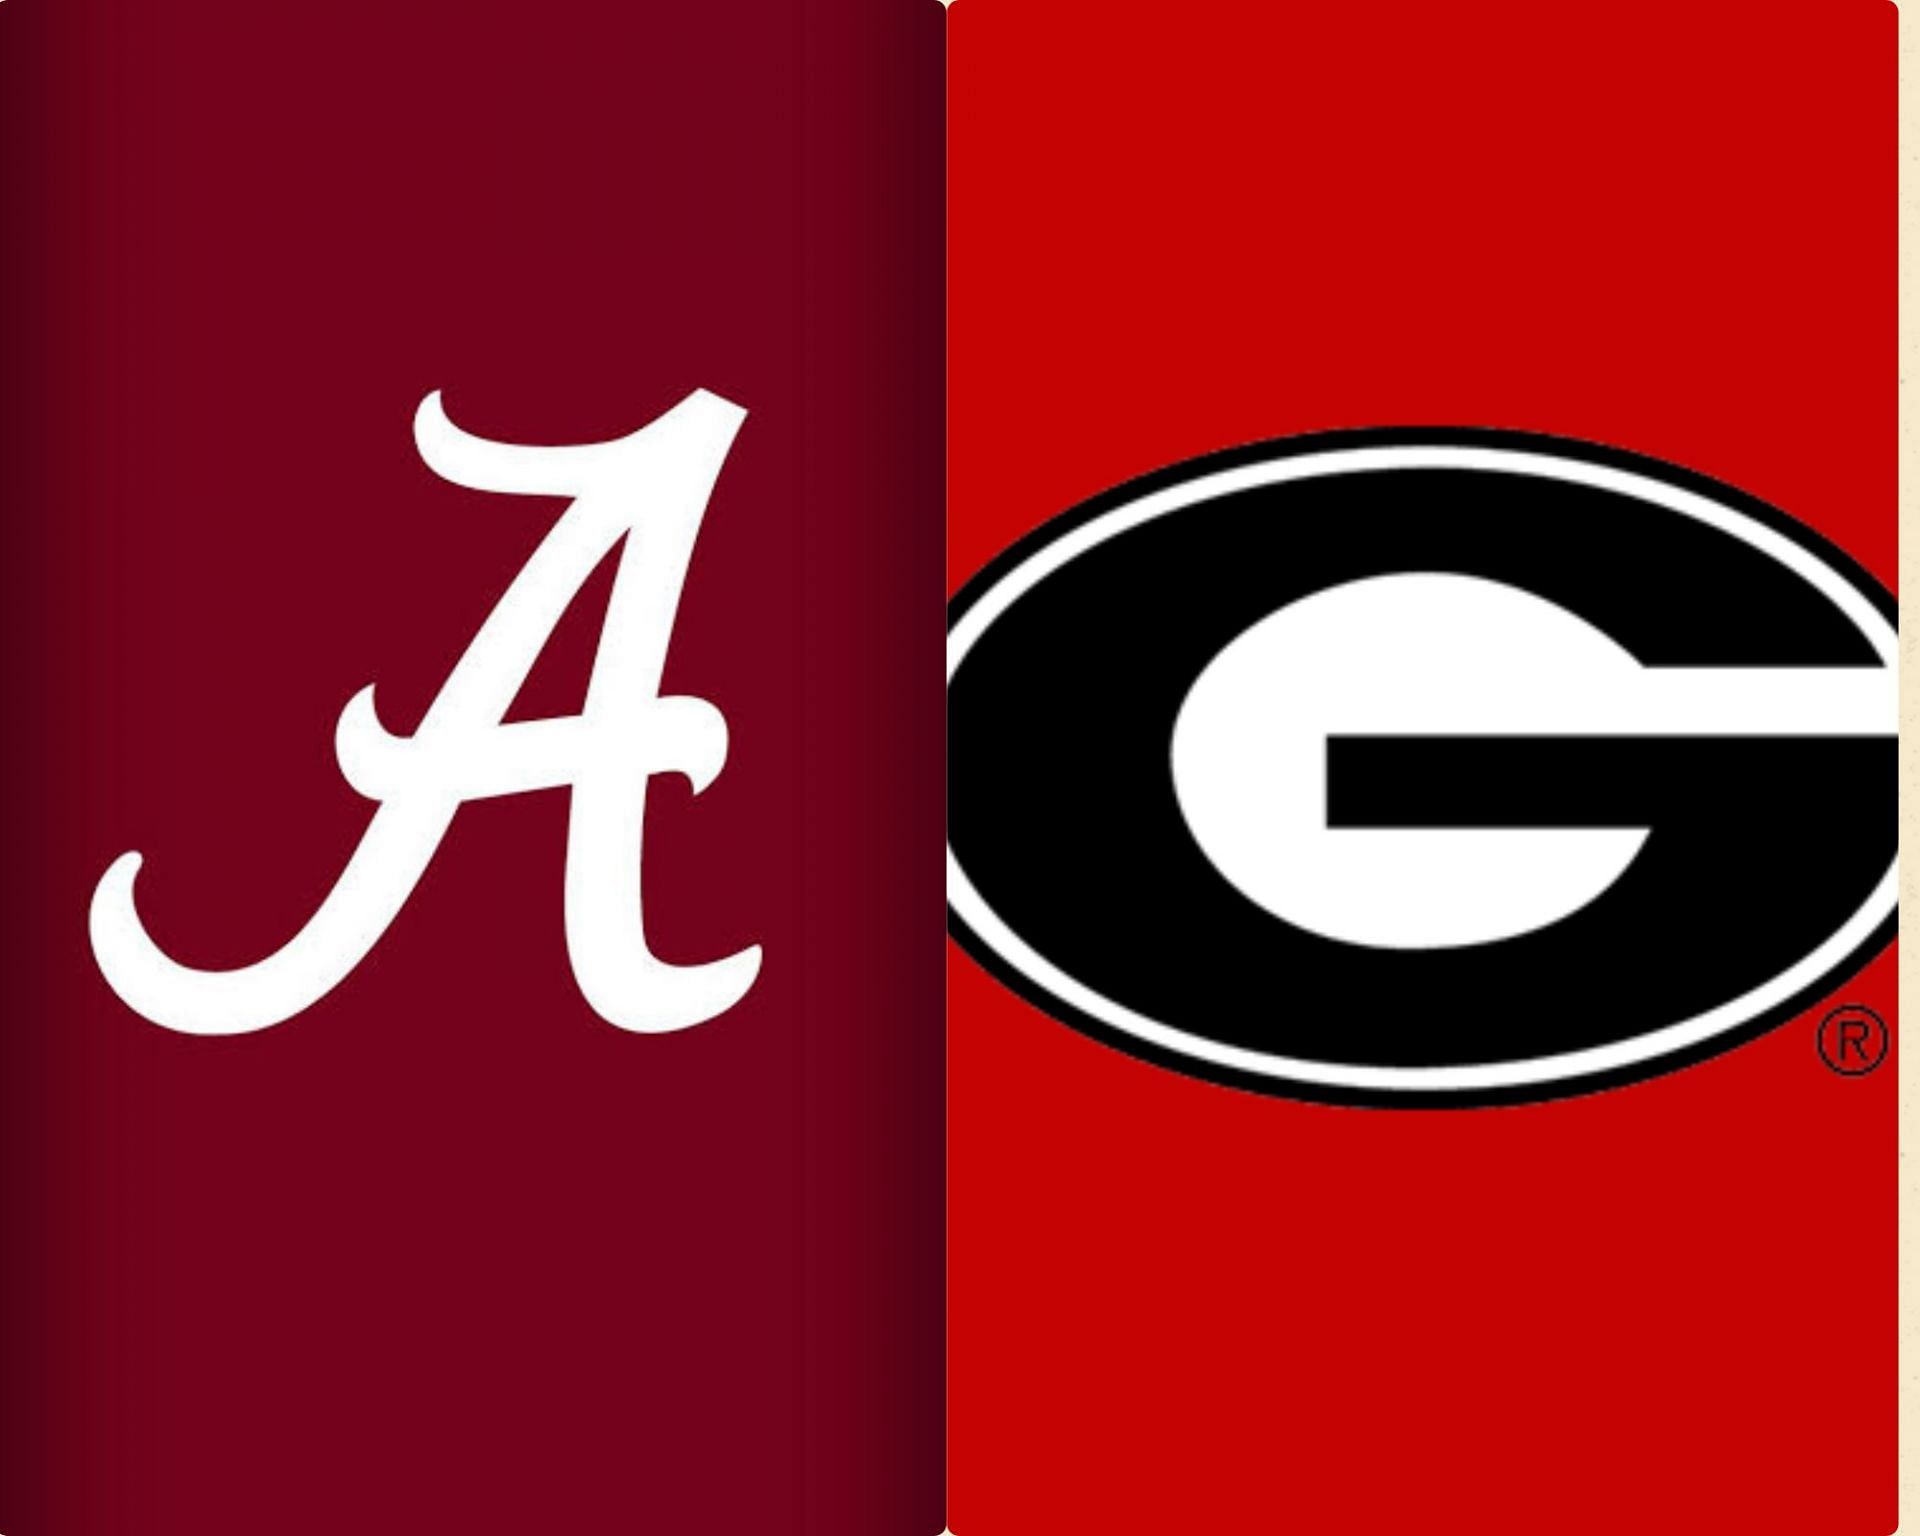 Alabama vs Georgia has been predicted for the 2023 SEC Championship Game 